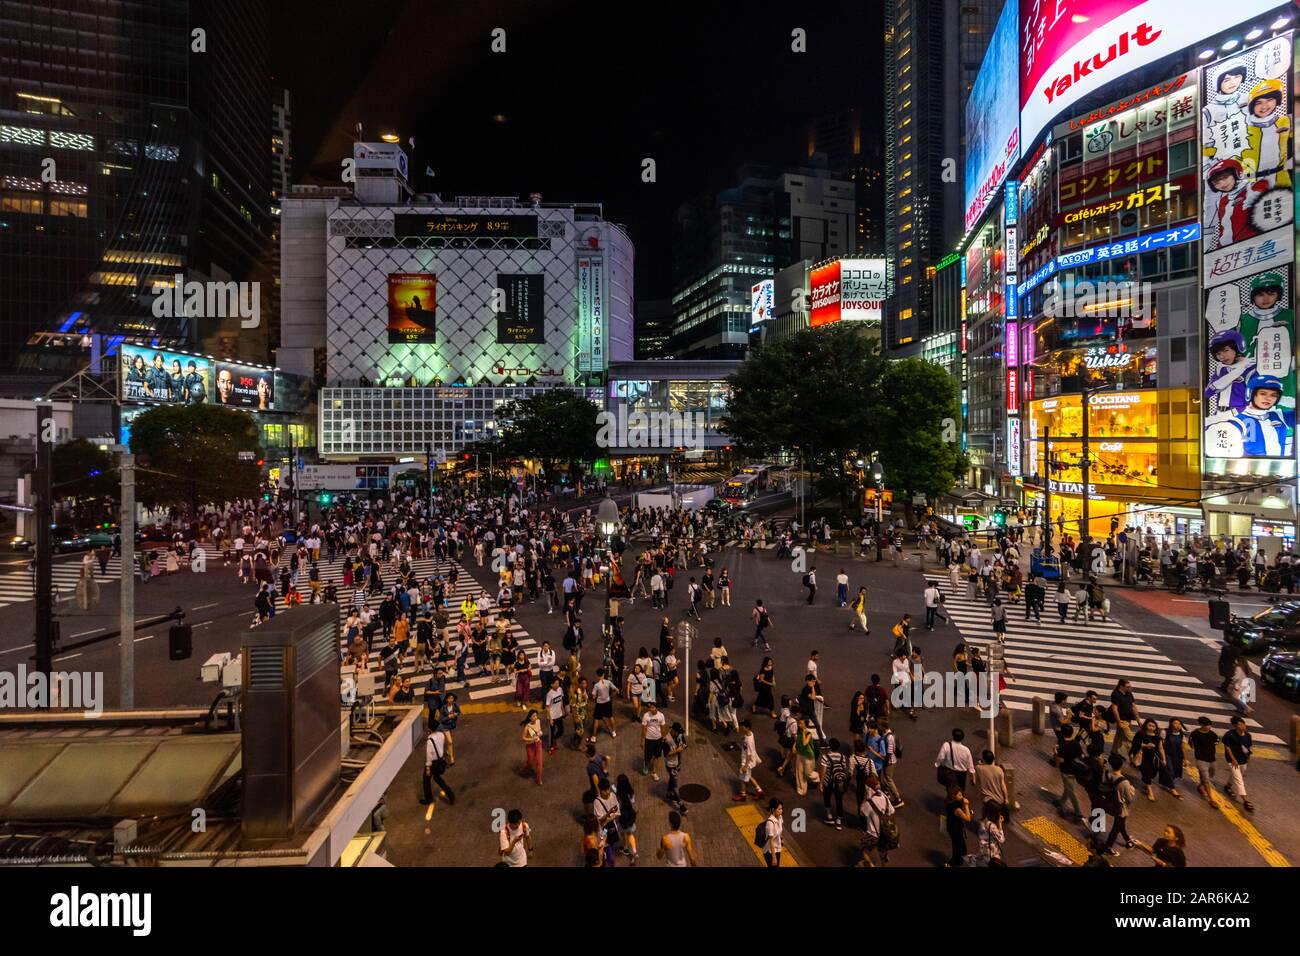 Night aerial view of Shibuya crossing, one of the most crowded crosswalks in the world. Tokyo, Japan, August 2019 Stock Photo